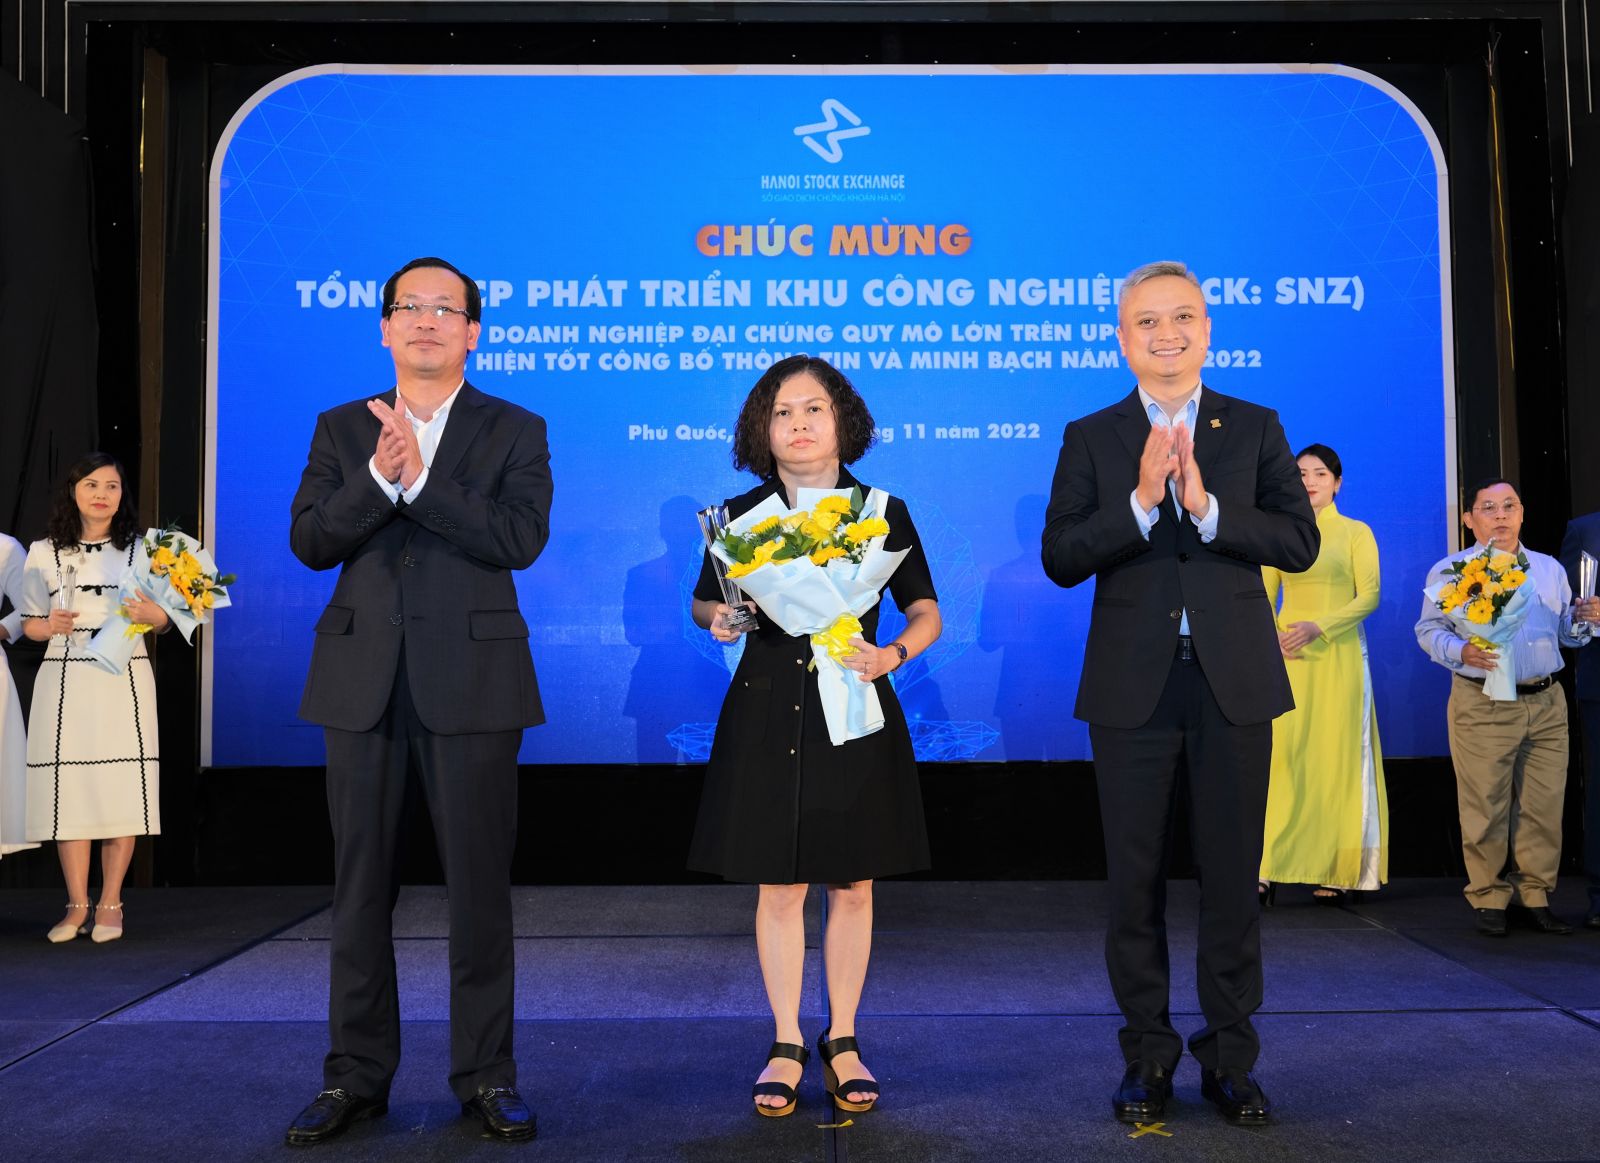 Ms. Nguyen Thi Hanh - Deputy General Director of SNZ received the Large-scale Public Enterprise trophy on UPCoM for good implementation of information disclosure and transparency in 2021 - 2022